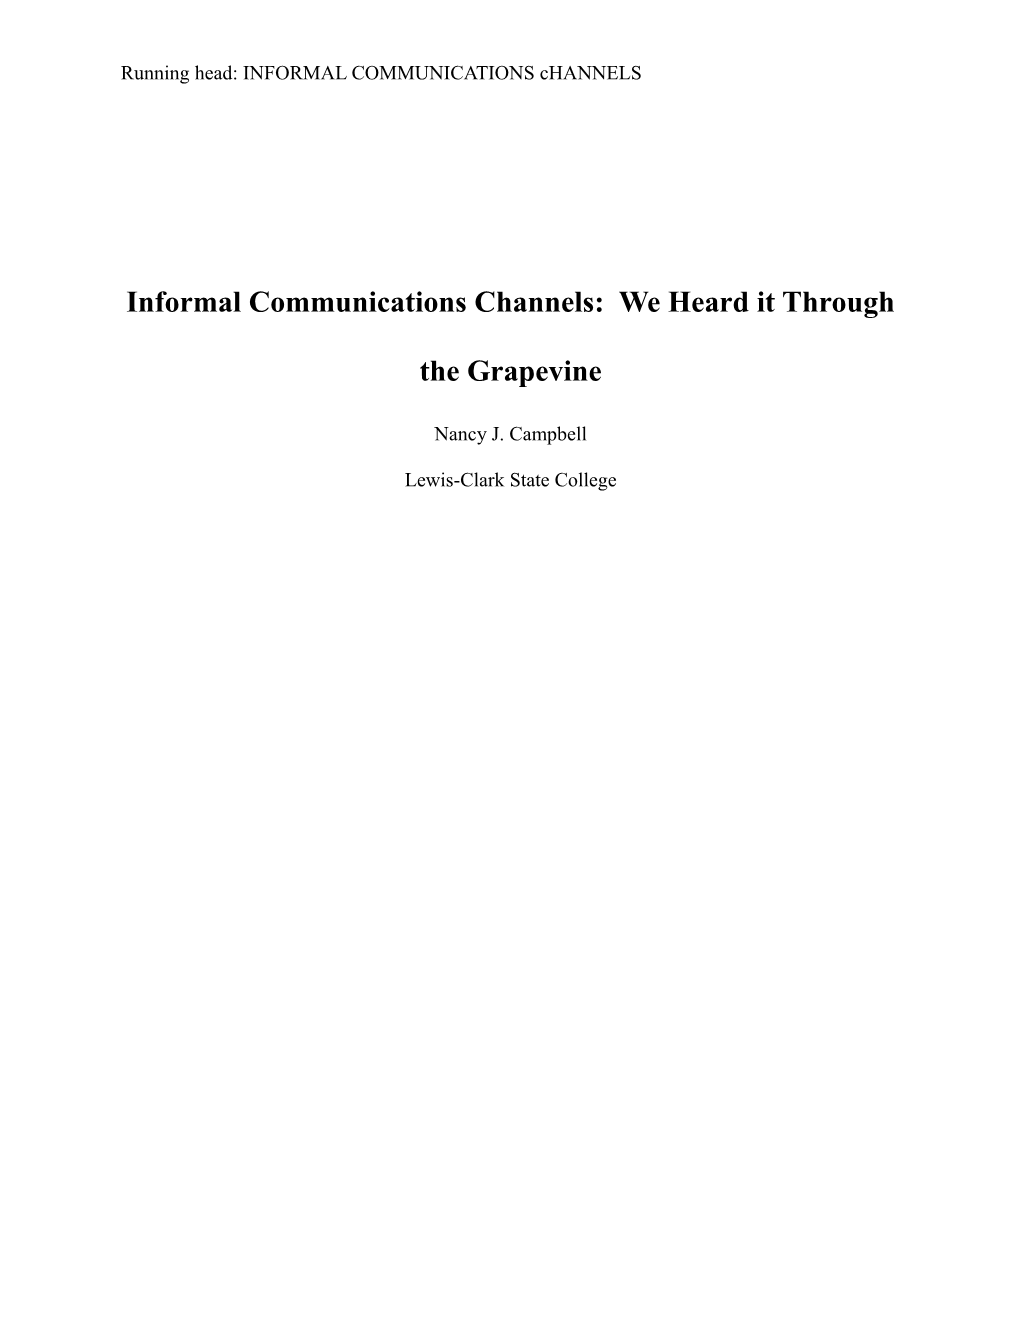 Informal Communications Channels: We Heard It Through the Grapevine